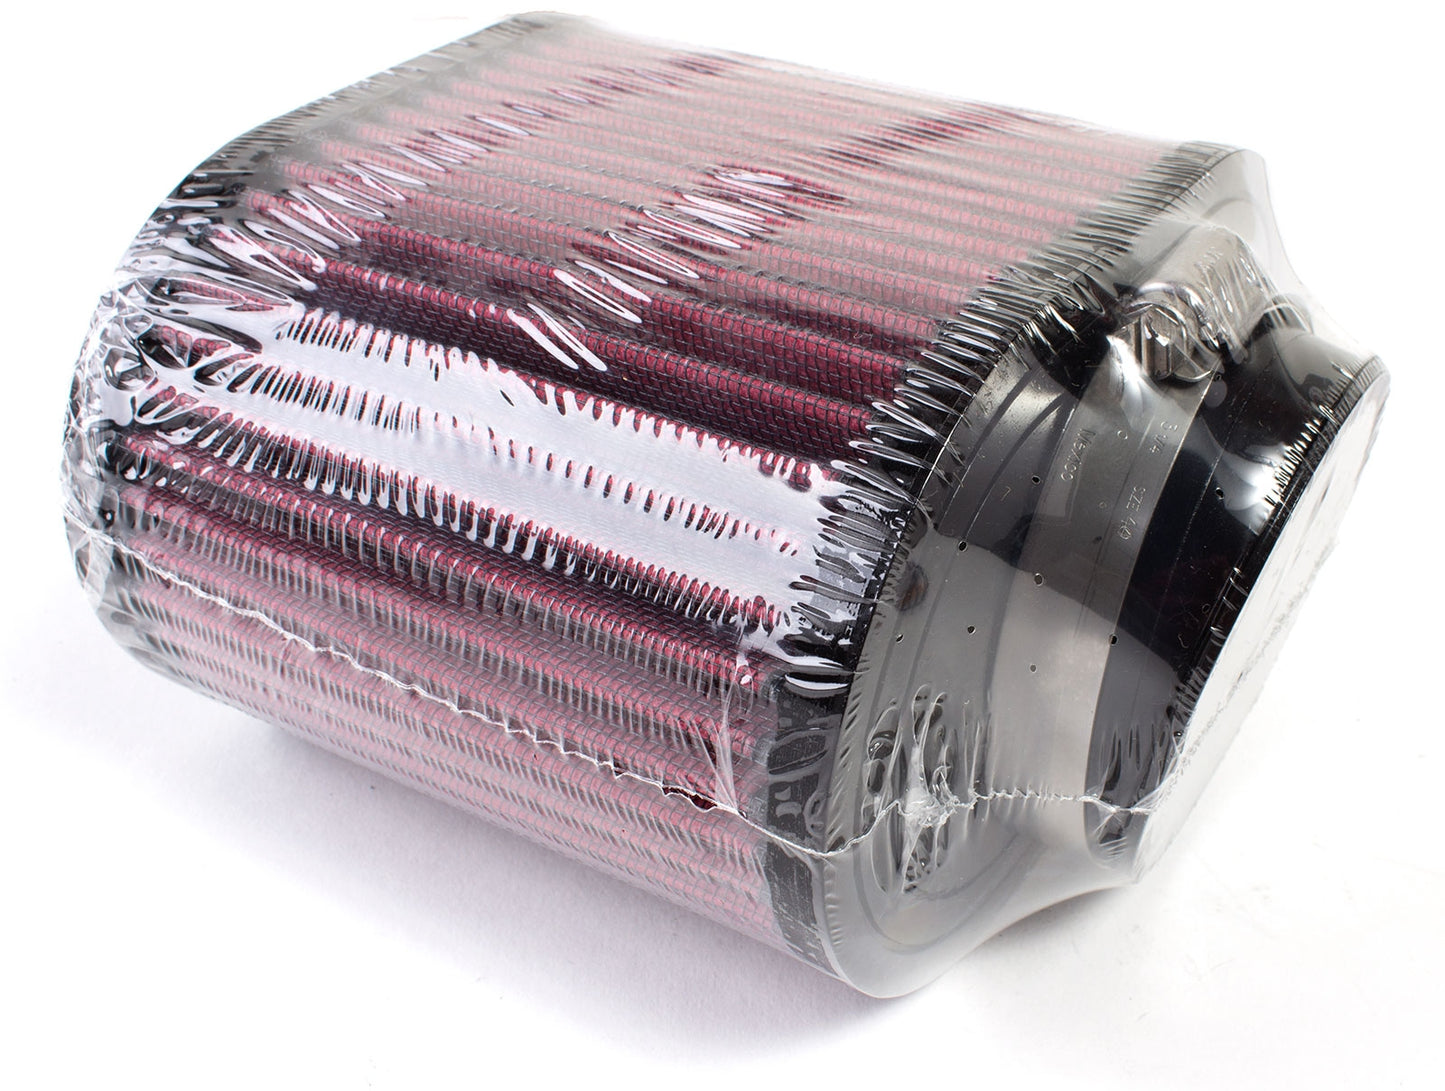 Air filter for FM turbo kits